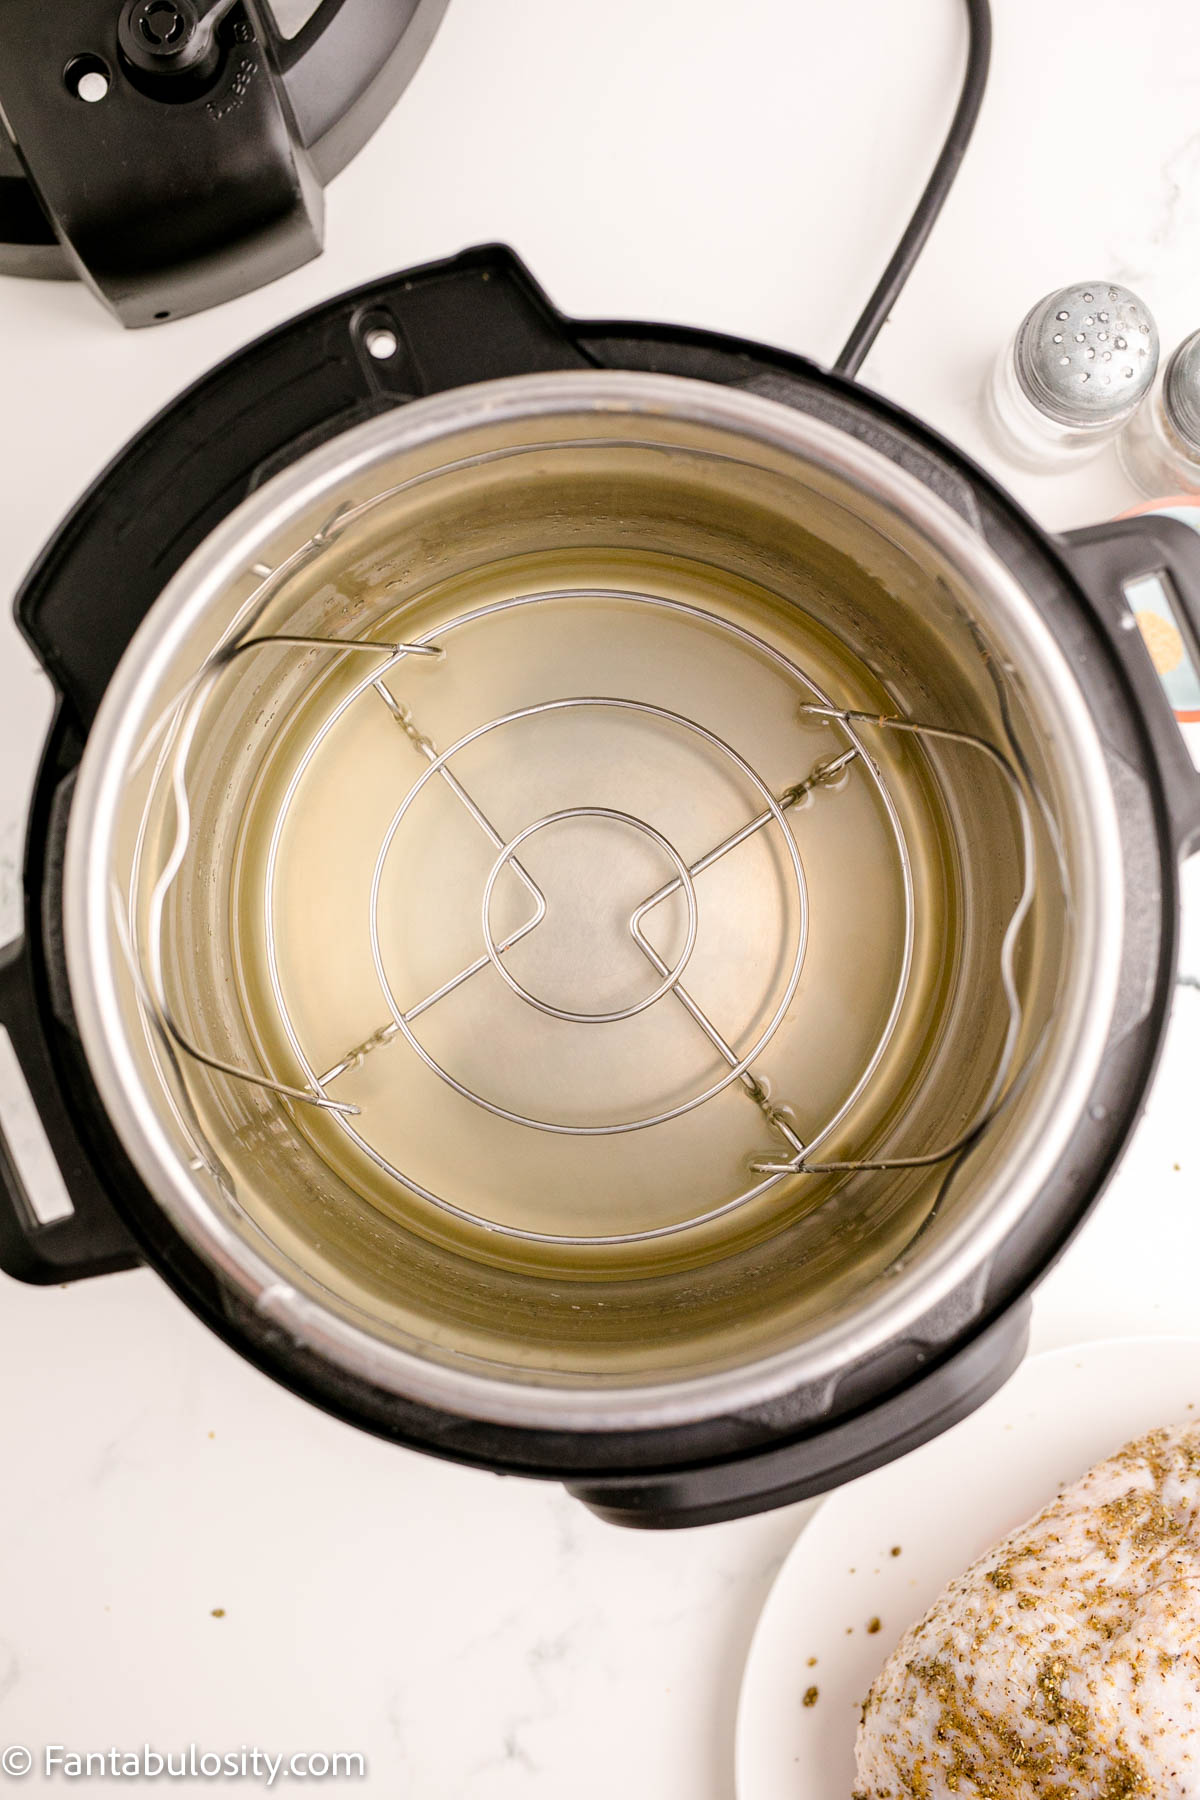 Place trivet in to pressure cooker